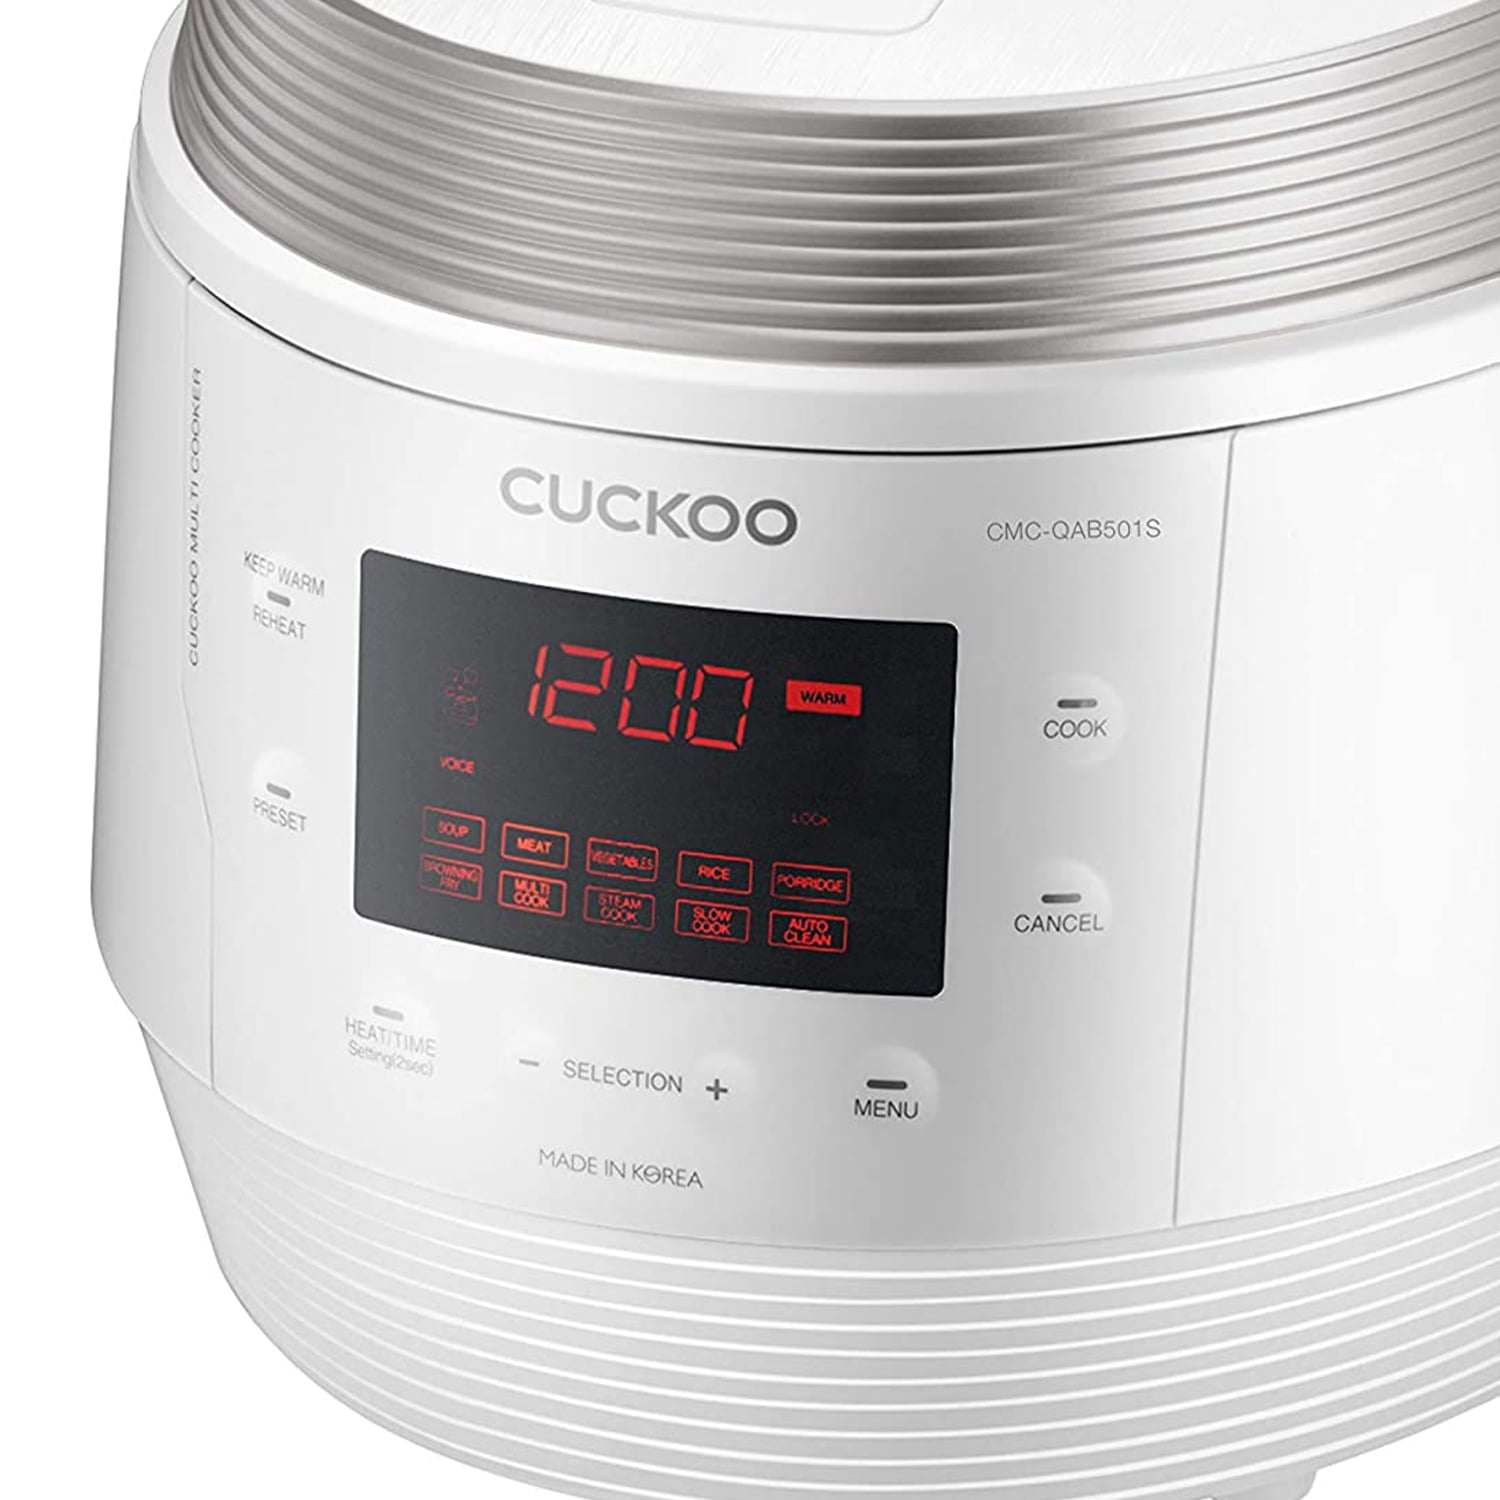 Made in Korea Yogurt Browning Fry Steamer Cuckoo CMC-QSN501S Q5 SUPERIOR 8 in 1 Multi Pressure Slow Warmer Soup Maker Stainless Steel Black Rice Cooker 